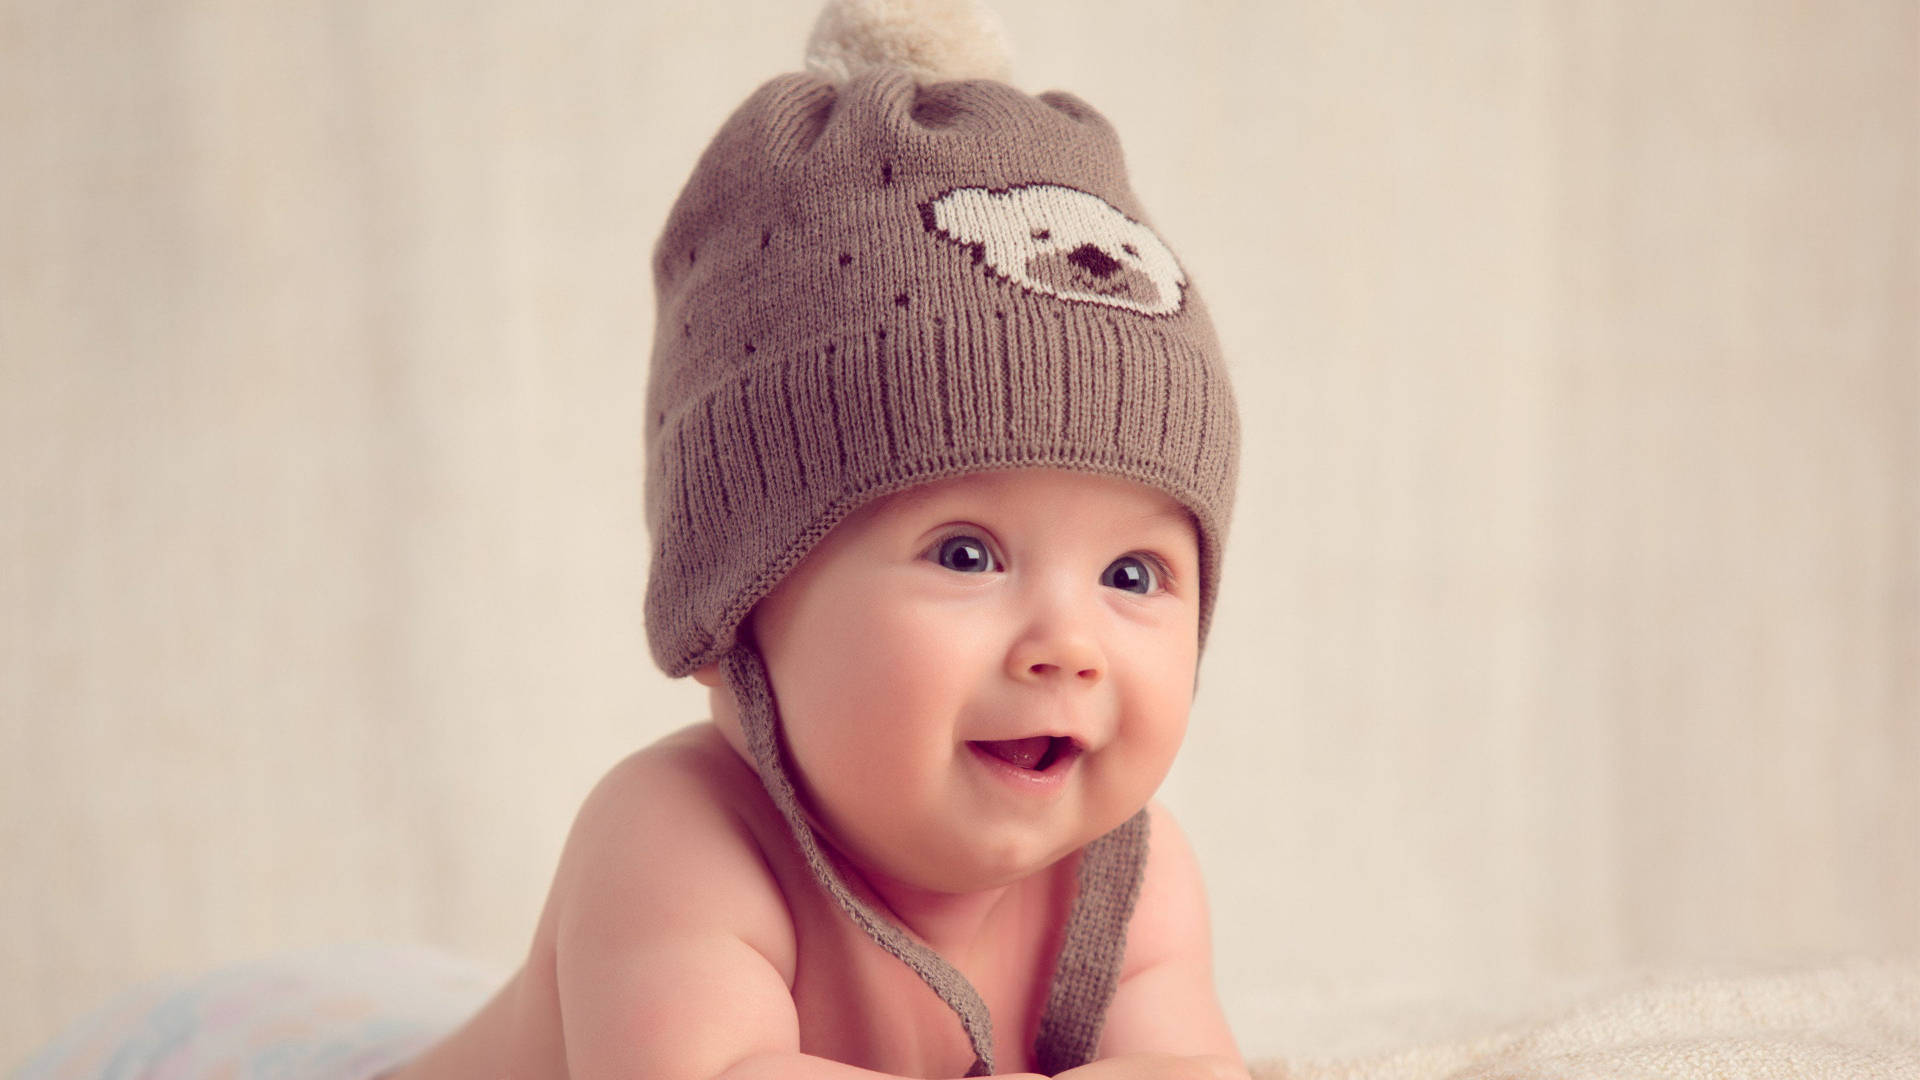 Smiling Adorable Baby Love Wallpaper